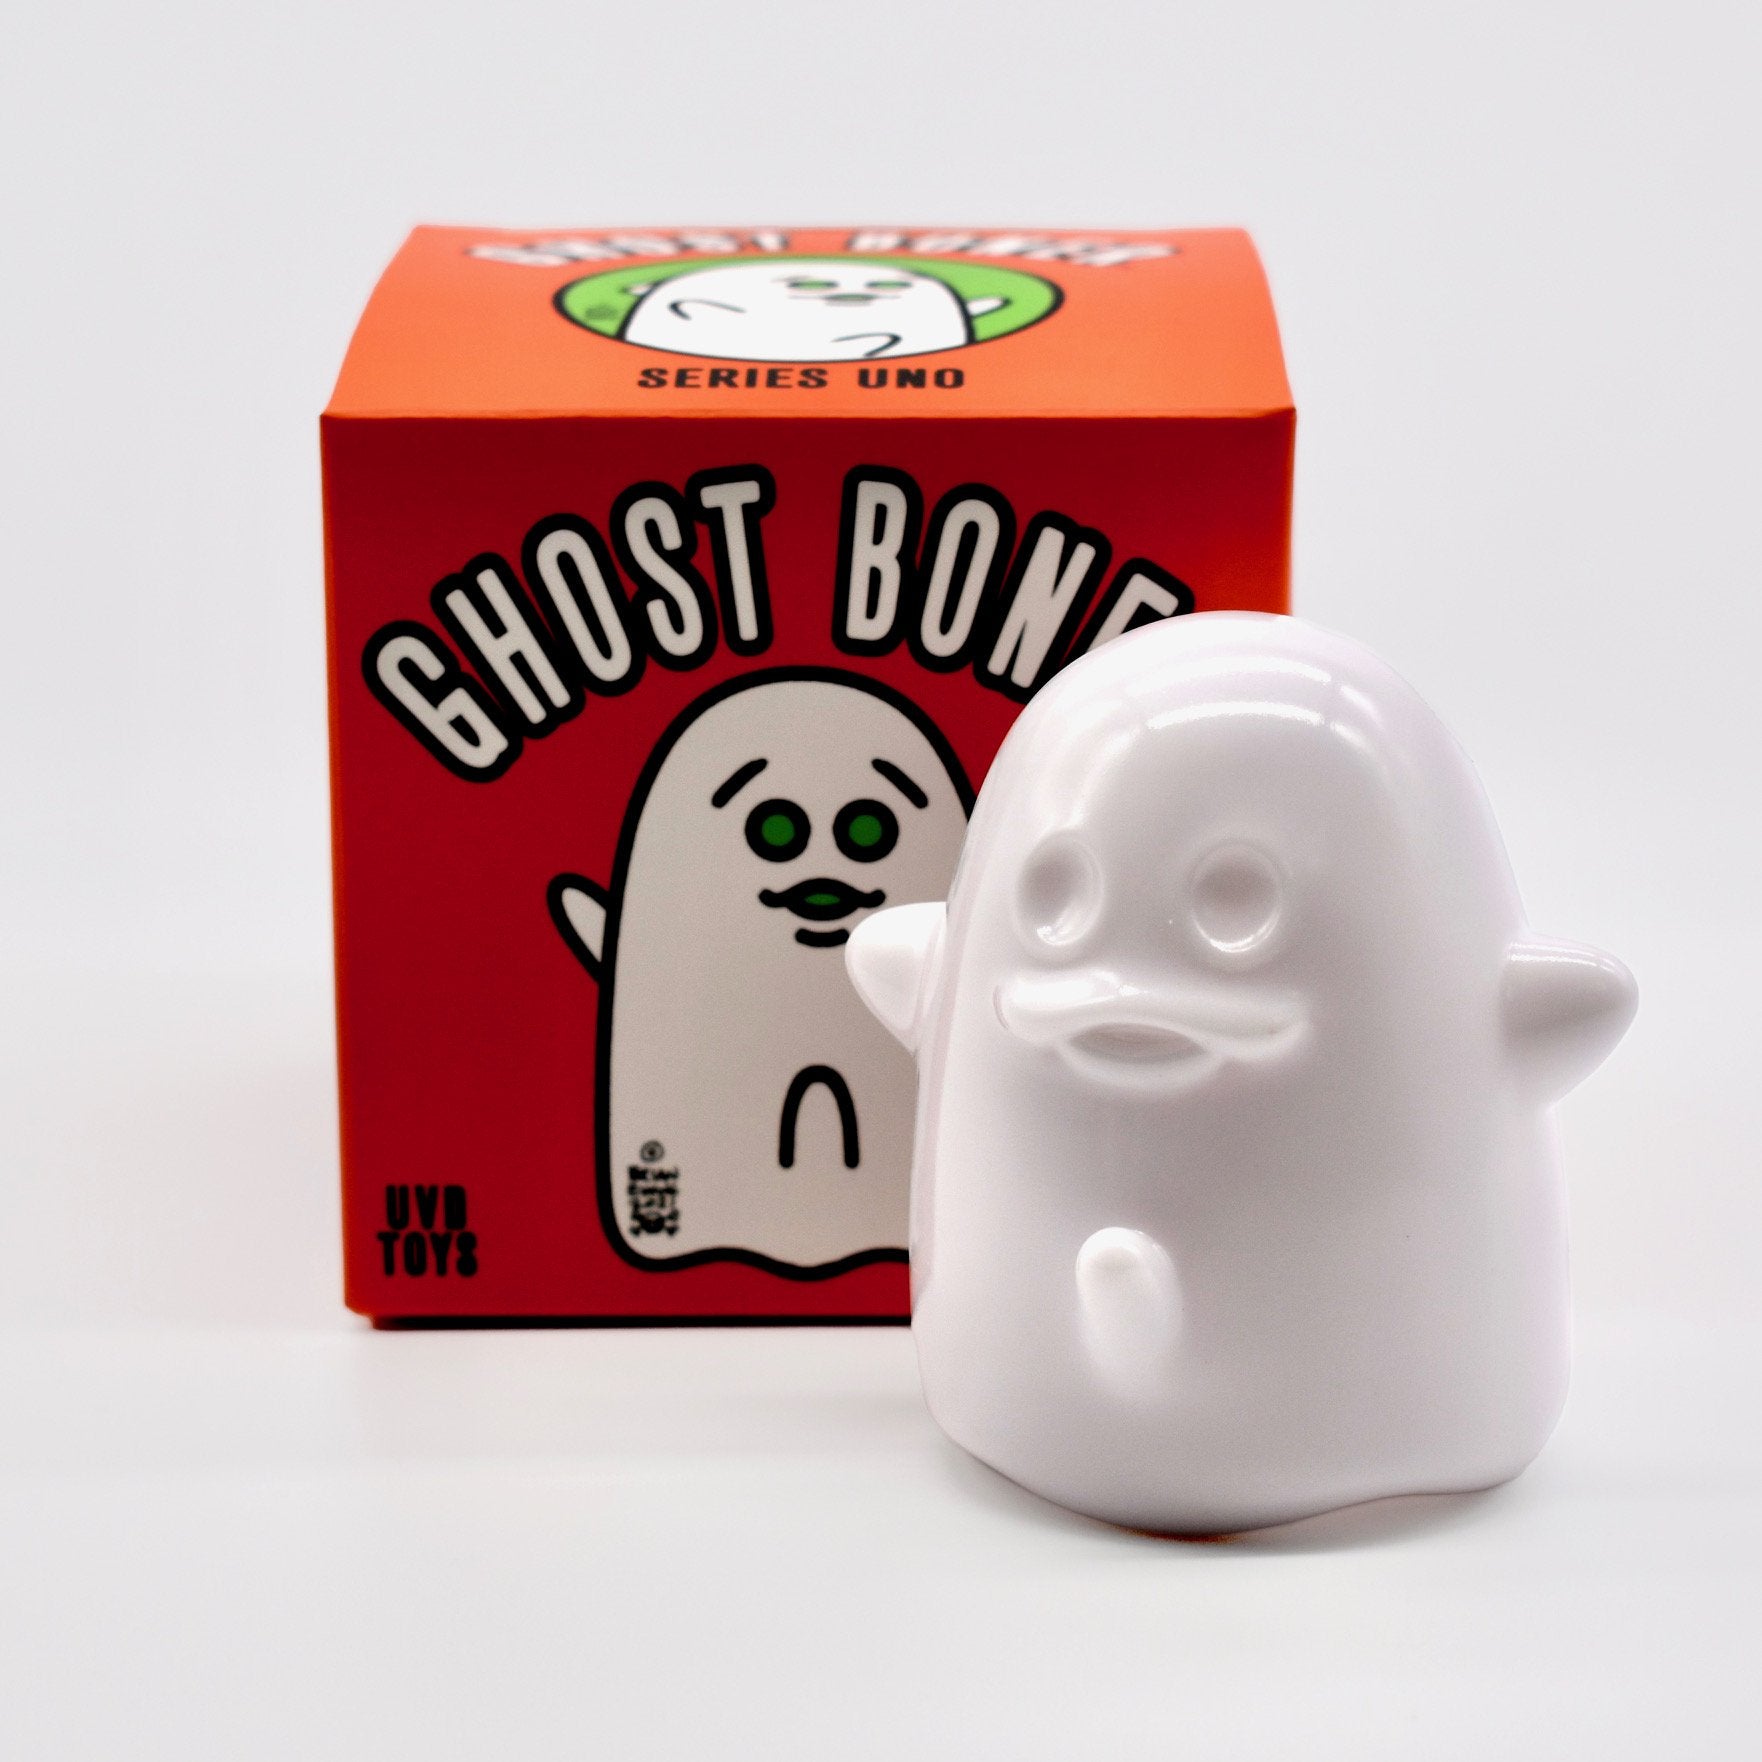 Ghost Boner DIY White 3-inch vinyl figure by Brian Ewing x UVD Available Now